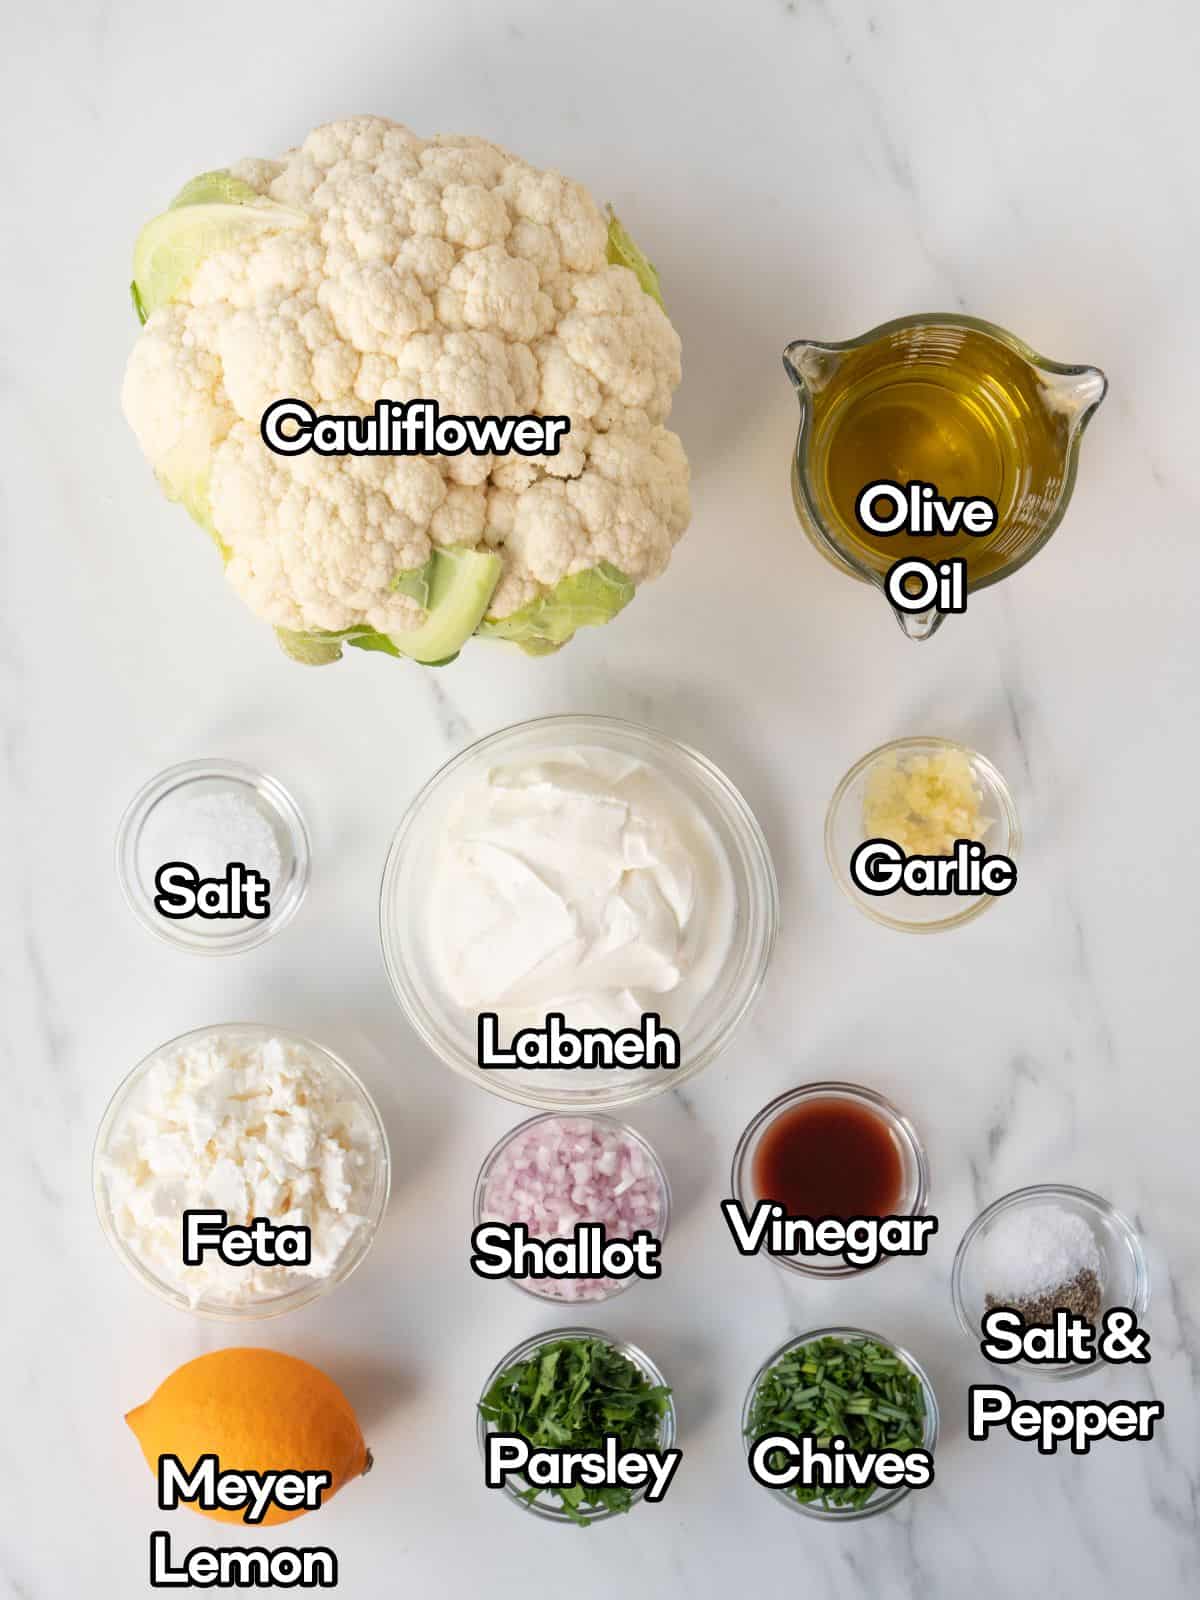 Mise-en-place of all ingredients to make whole roasted cauliflower.